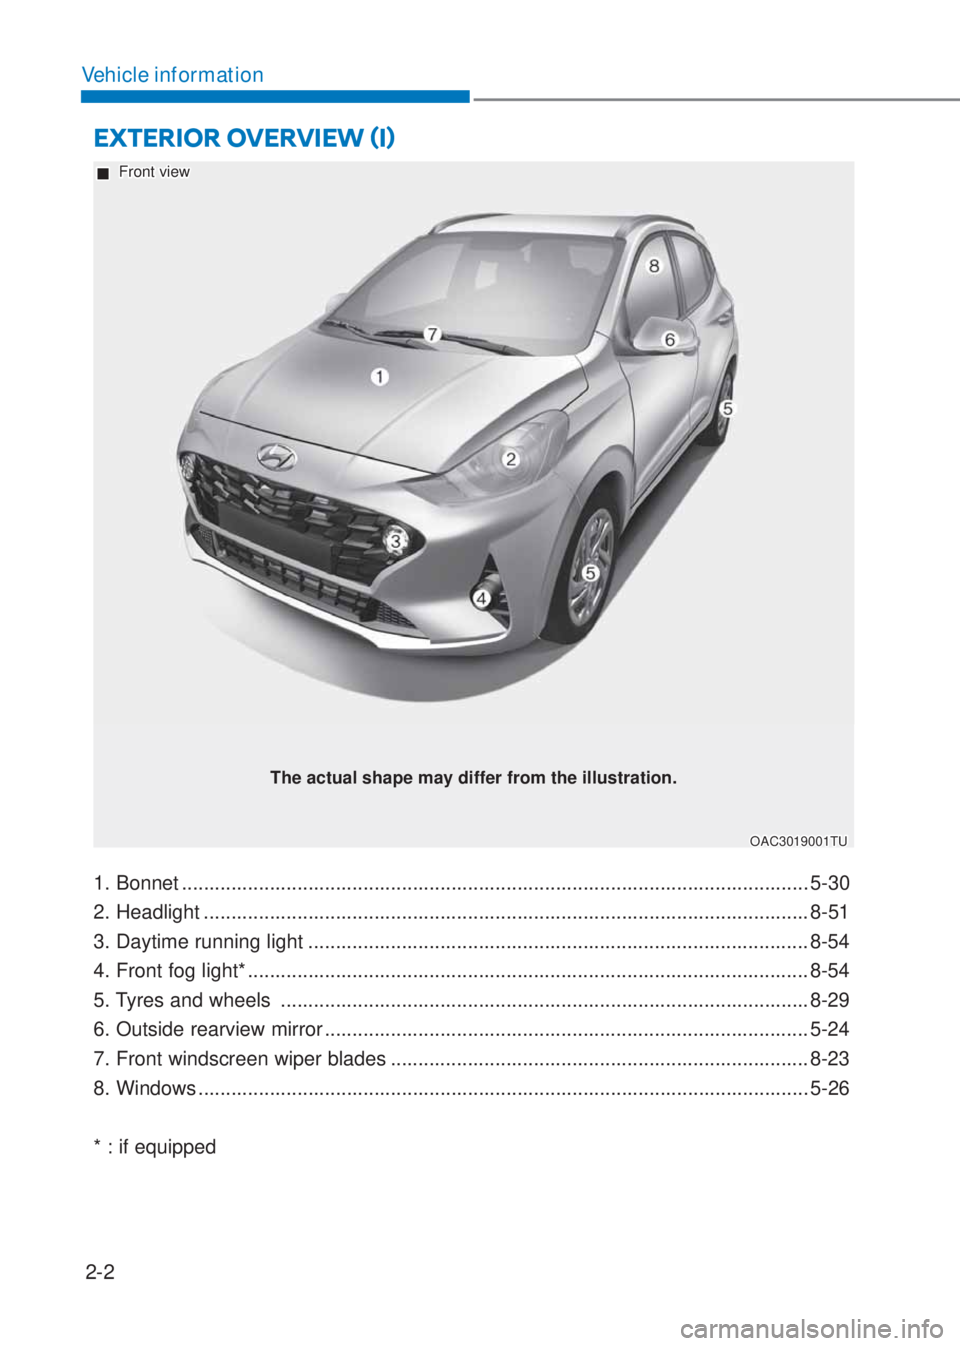 HYUNDAI I10 2023  Owners Manual 2-2
Vehicle information
E�;TERIOR OVERVIEW ãIä
1. Bonnet .................................................................................................................. 5-30
2. Headlight ......